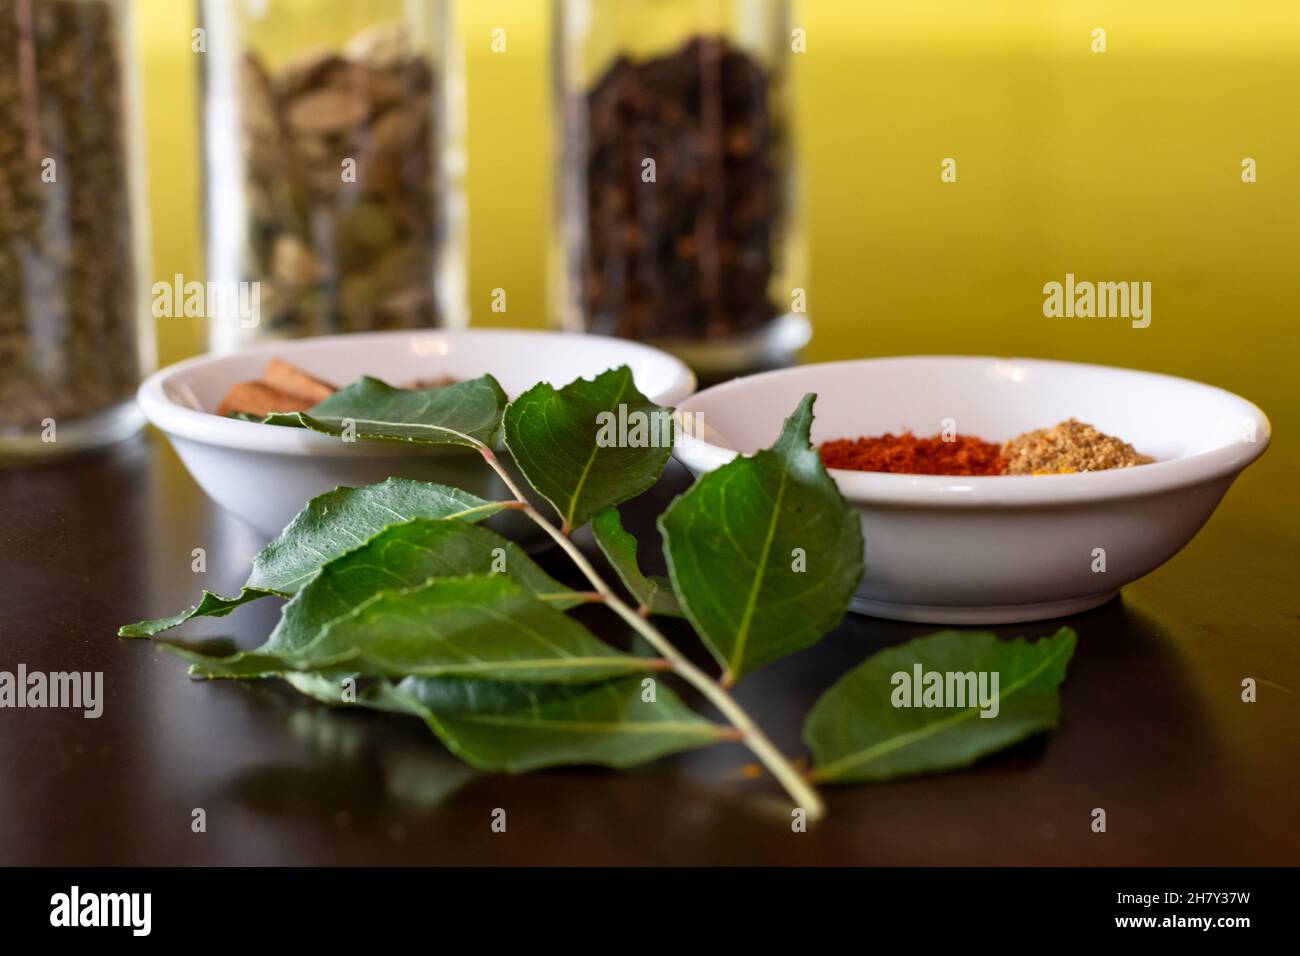 Mixture of Asian spices used to make curry displayed on a wooden table with fresh curry leaves as a garnish Stock Photo